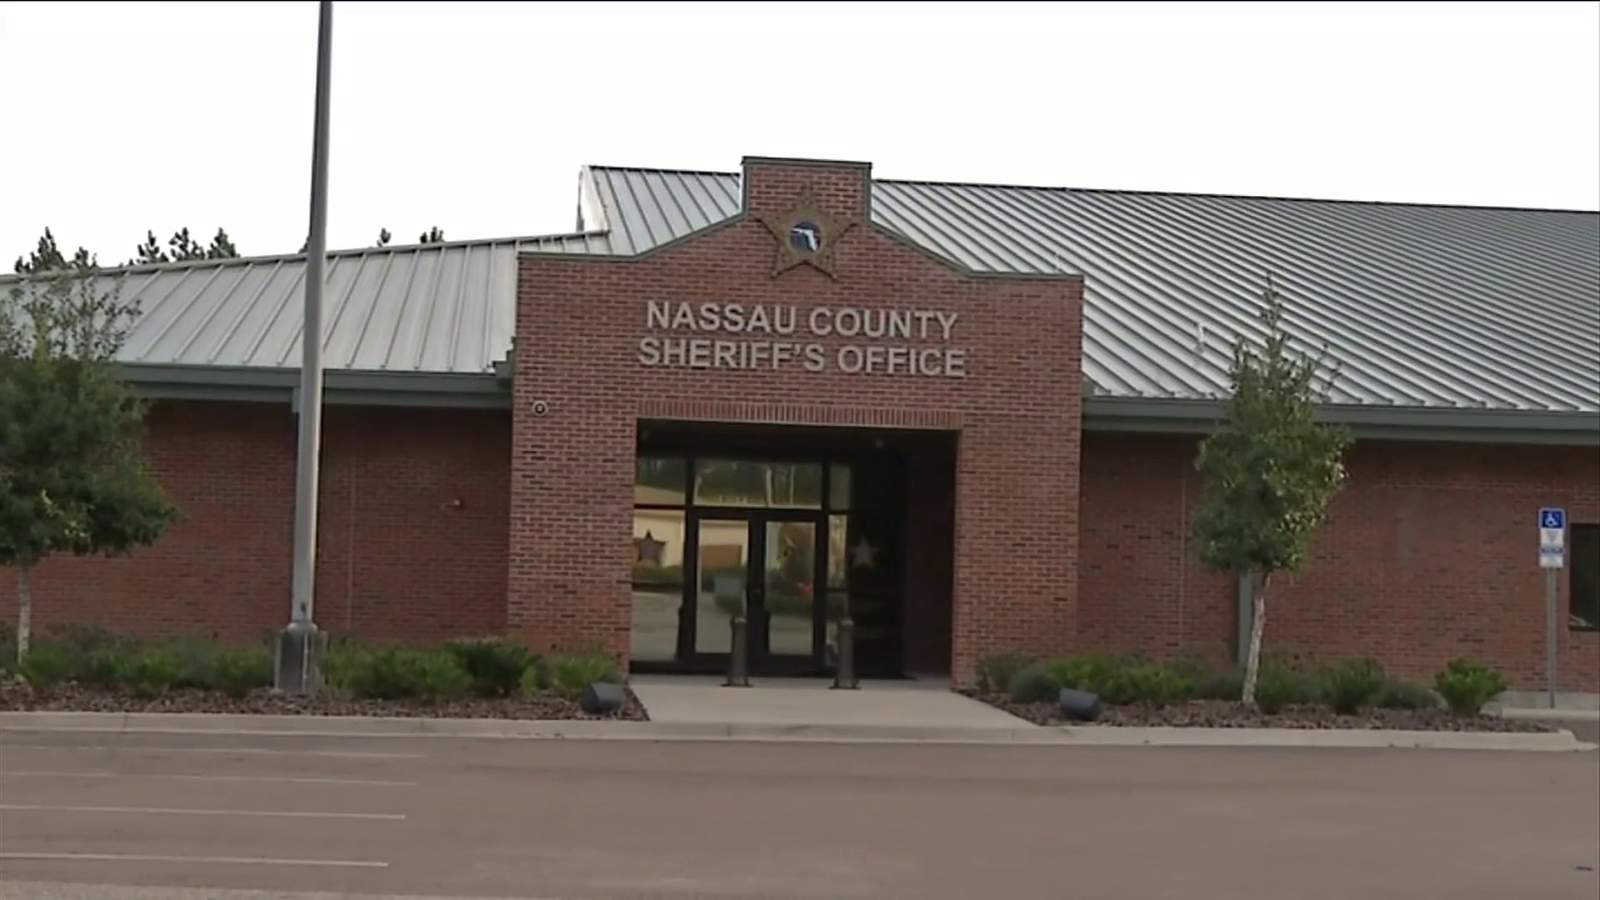 Sheriff: Calls for service soar as Nassau County population continues to grow